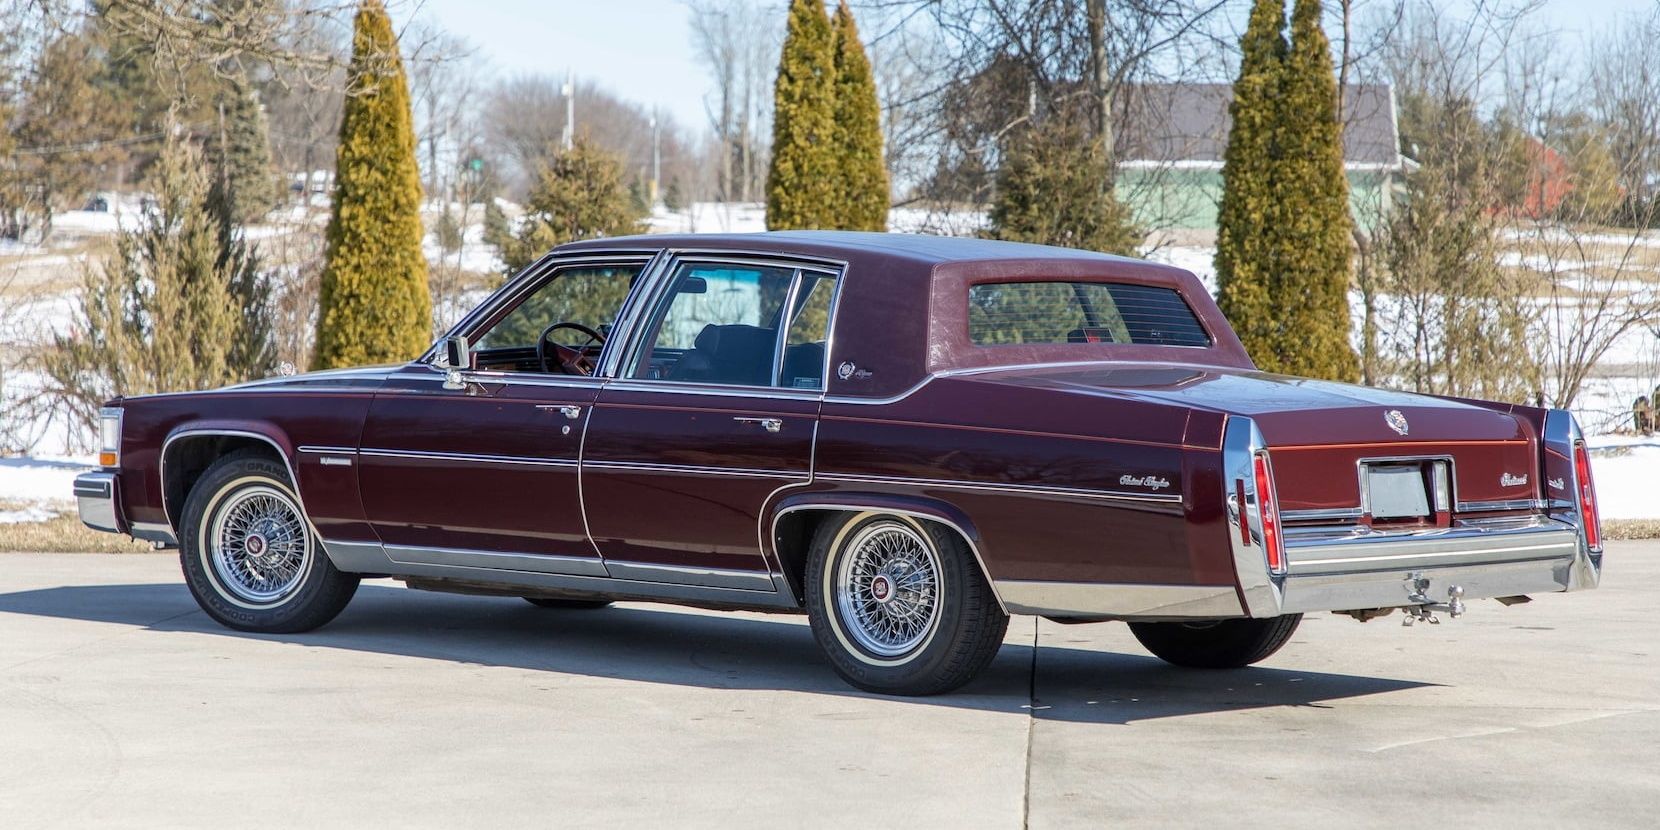 1981 Cadillac Fleetwood Brougham V8 6 4 2 Cropped